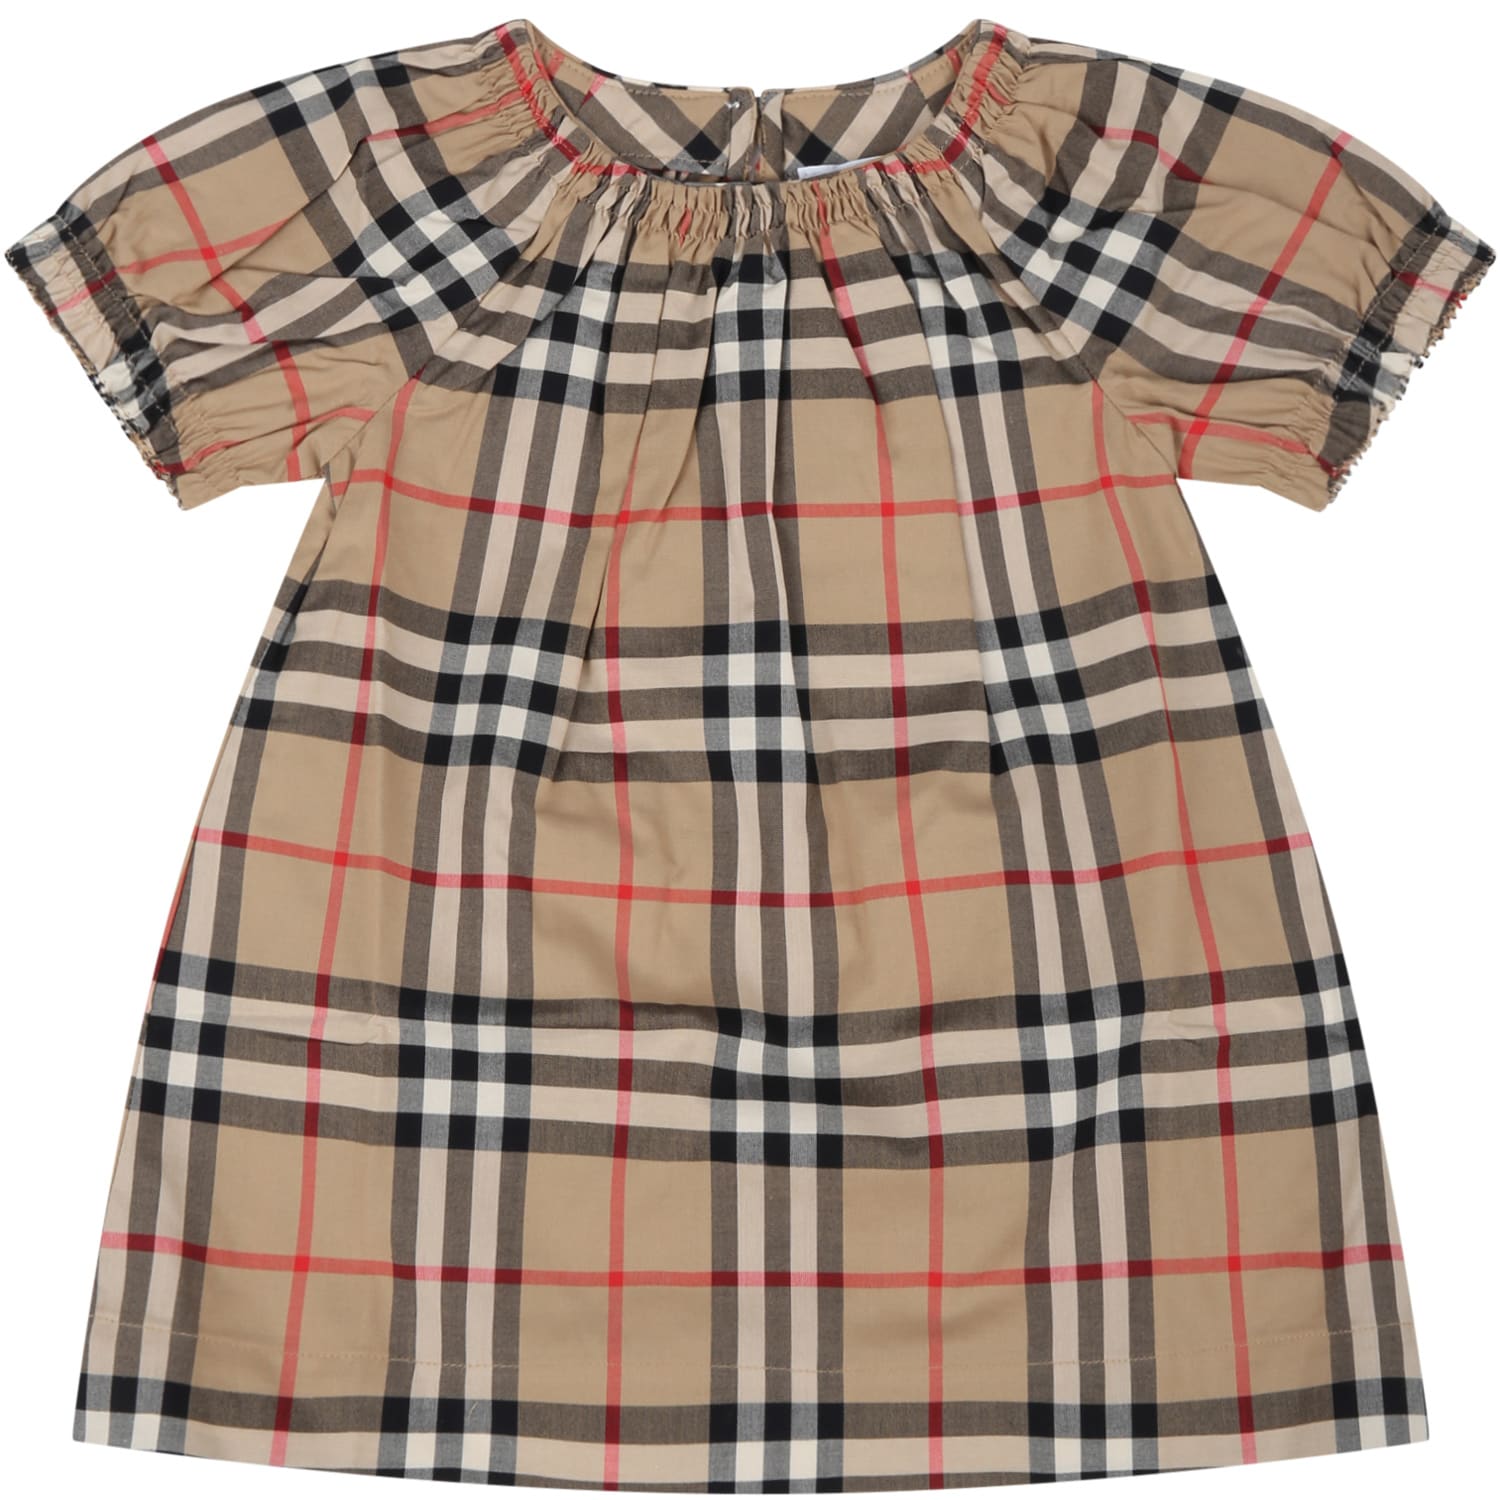 Burberry Beige Dress For Babygirl With Vintage Checks